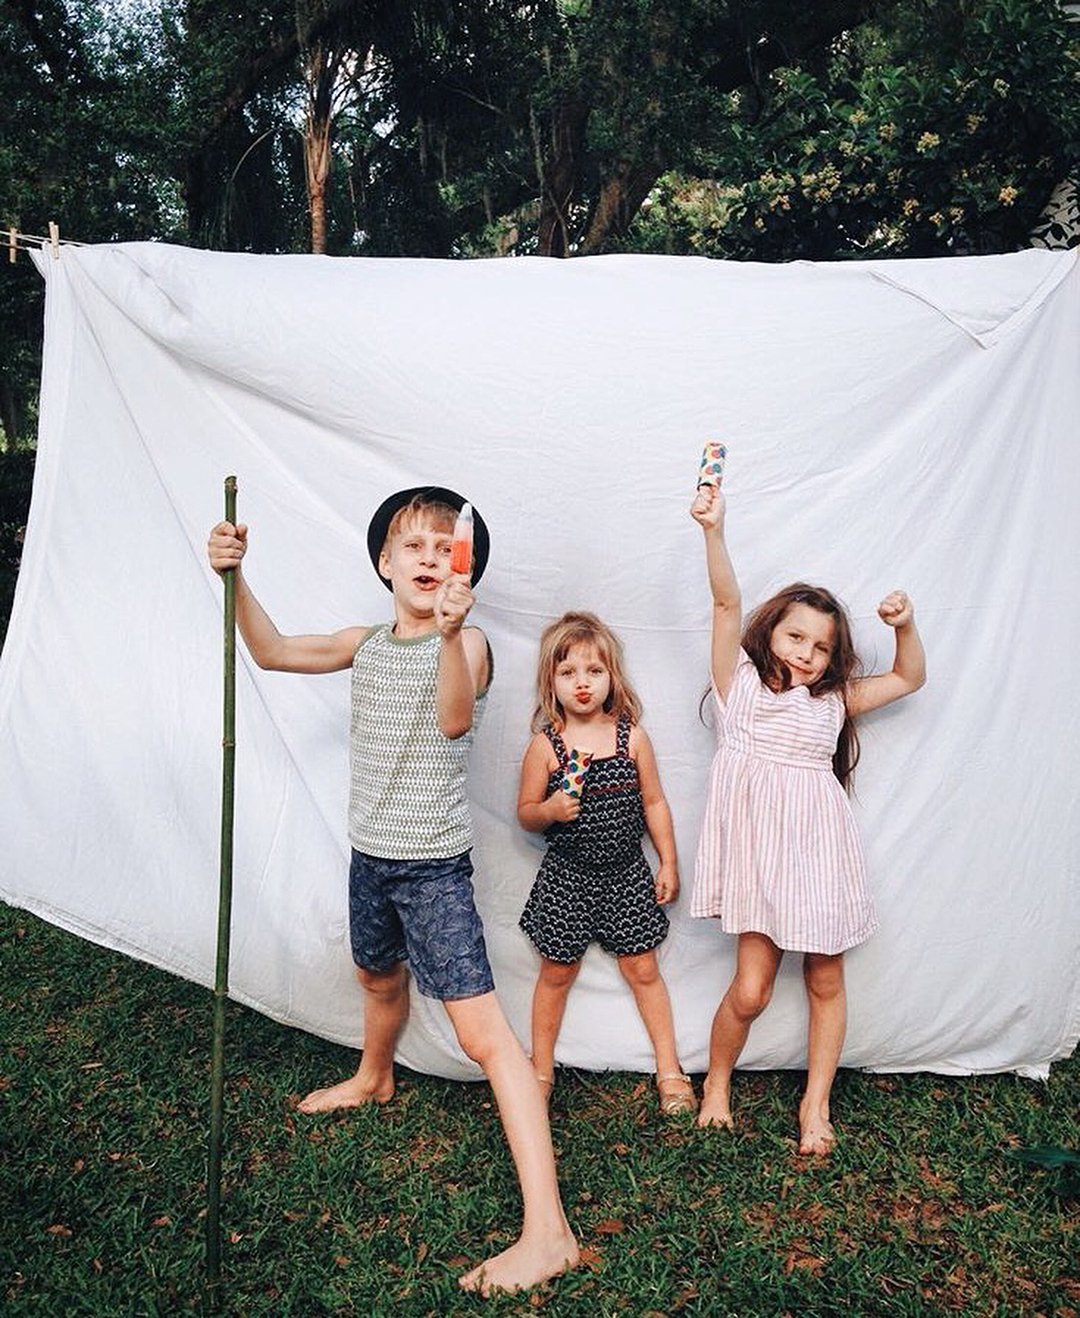 8 Tips for Photographing Children from the Best Family Instagrammers